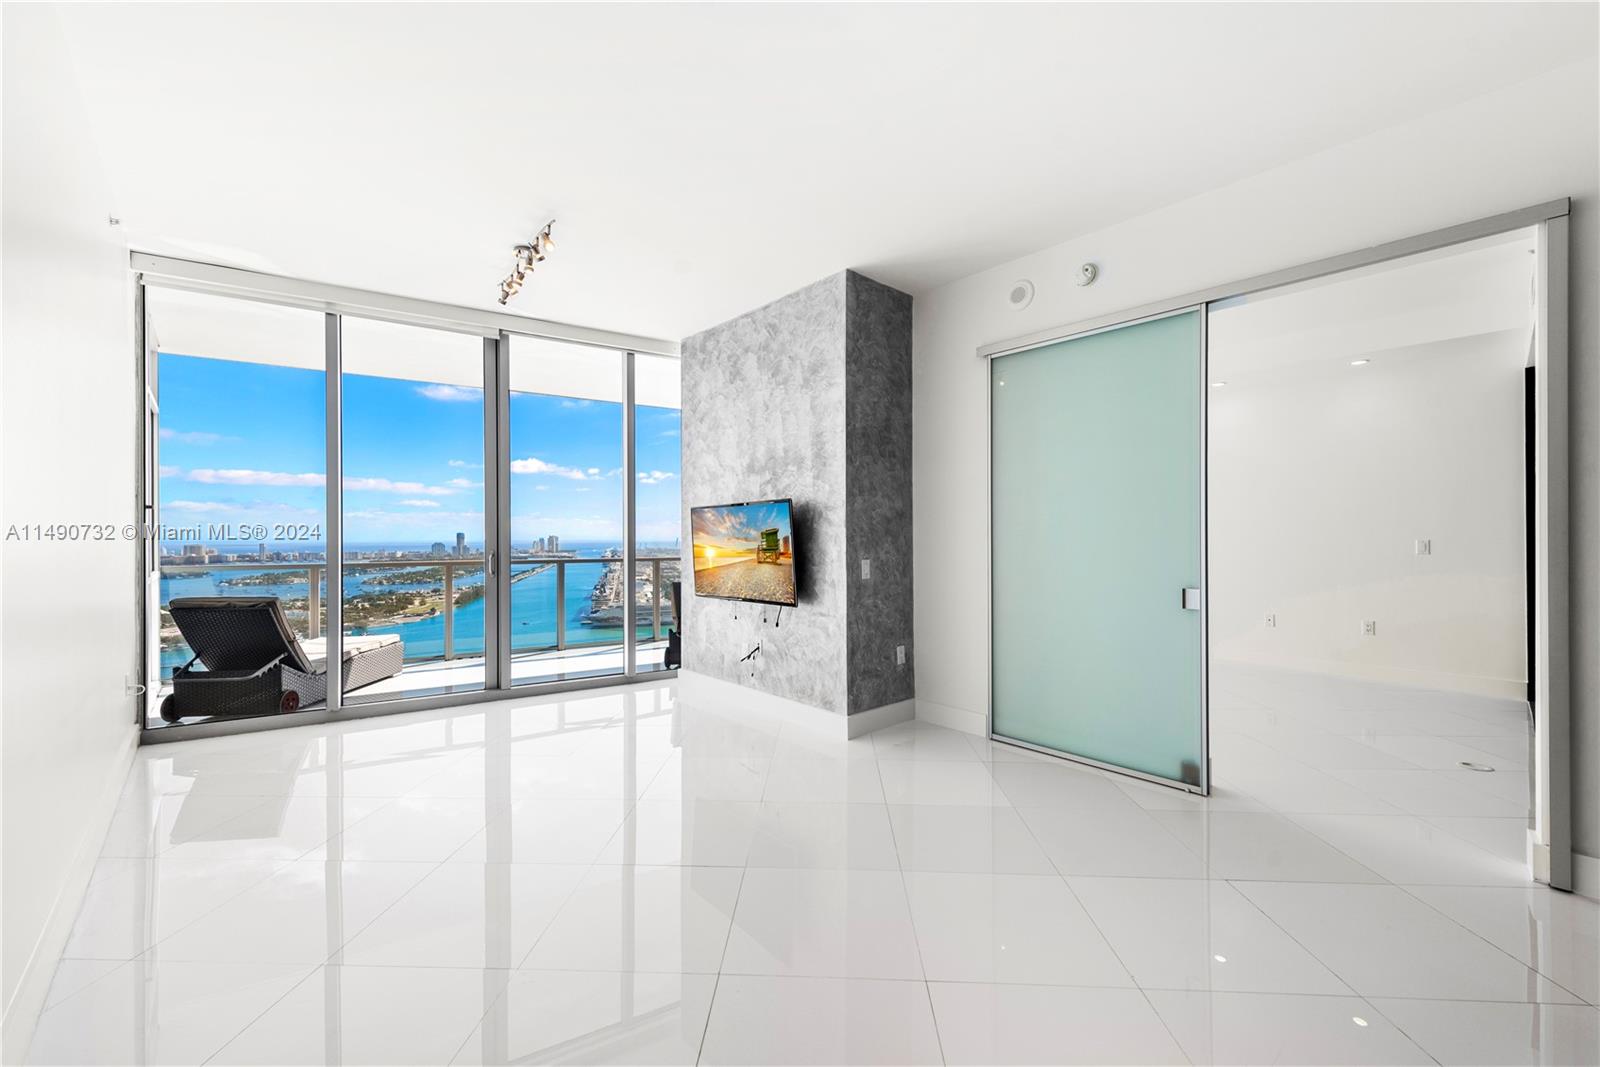 Stunningly Finished, 2bed / 2.5bath unit in the sky. Enjoy both Direct Bay and Ocean Views form this high floor unit. Unfurnished w /2 Private Elevators. Building has tremendous luxury services, Valet , Gym , Private Mens/Women Locker Rooms w Steam and Sauna , Basketball Court, 1st Floor Restaurant and Spa Service, Game Room and 2 pools with Drink/Food  Service on the weekends. Located steps from Miamis Best Culture , Adrienne Arsht center , Frost Science , Perez Modern Art Museum. EASY to show.